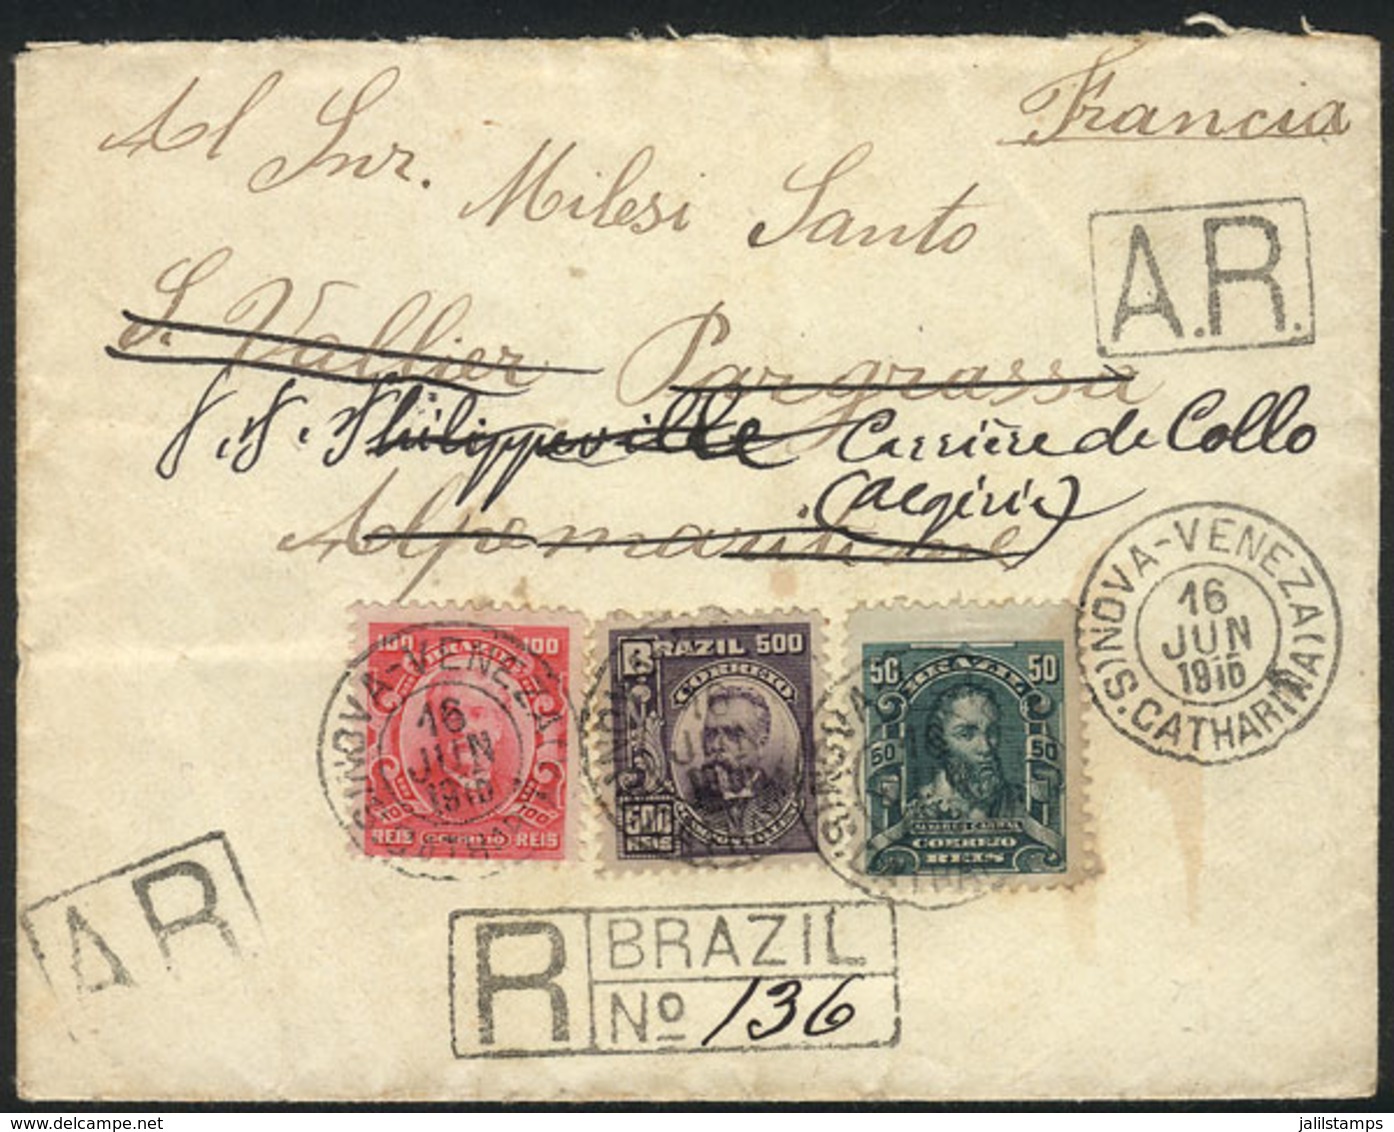 BRAZIL: Registered Cover With AR Sent From NOVA-VENEZA To France On 16/JUN/1910, Franked With 650Rs., VF! - Vorphilatelie